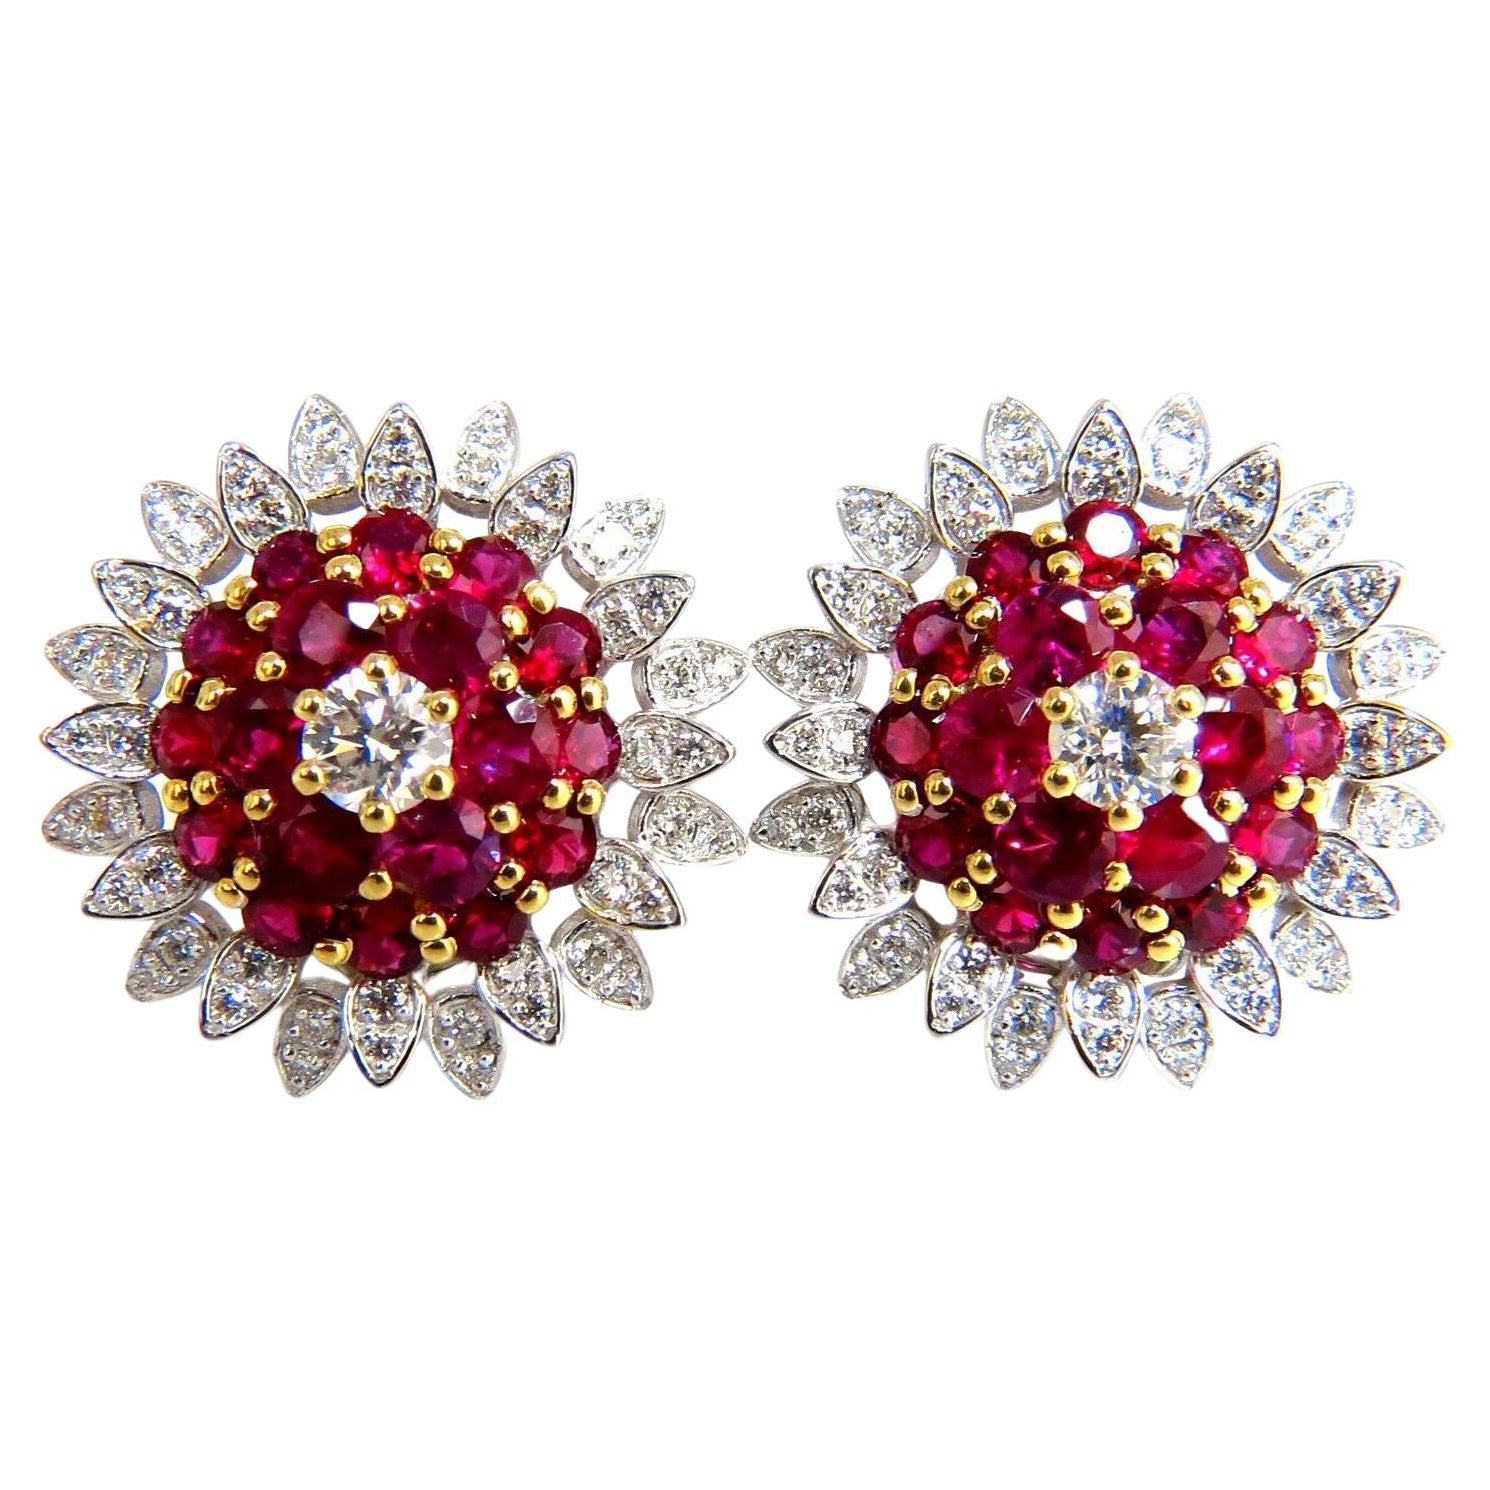 6.26ct Natural Vivid Red Ruby Diamond Domed Cluster Clip Earrings 18kt For Sale